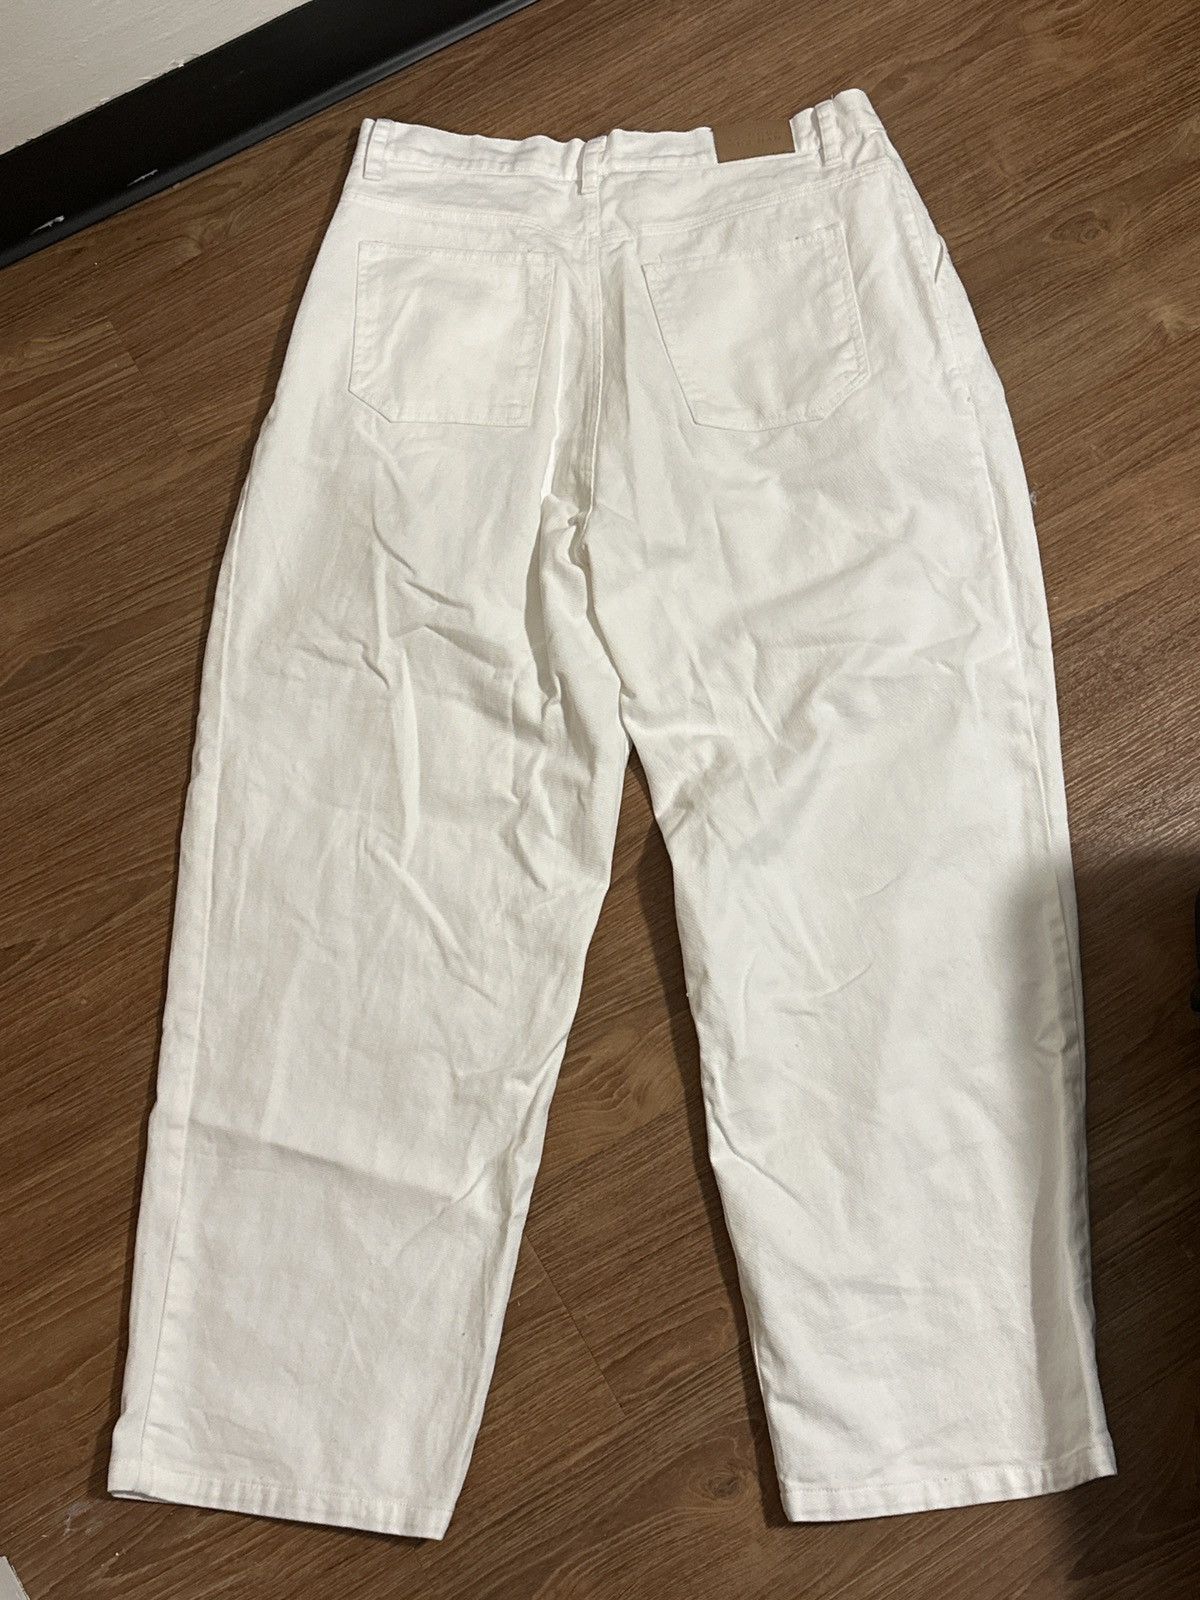 Other Korean Brand White Wide Pants Size US 34 / EU 50 - 2 Preview